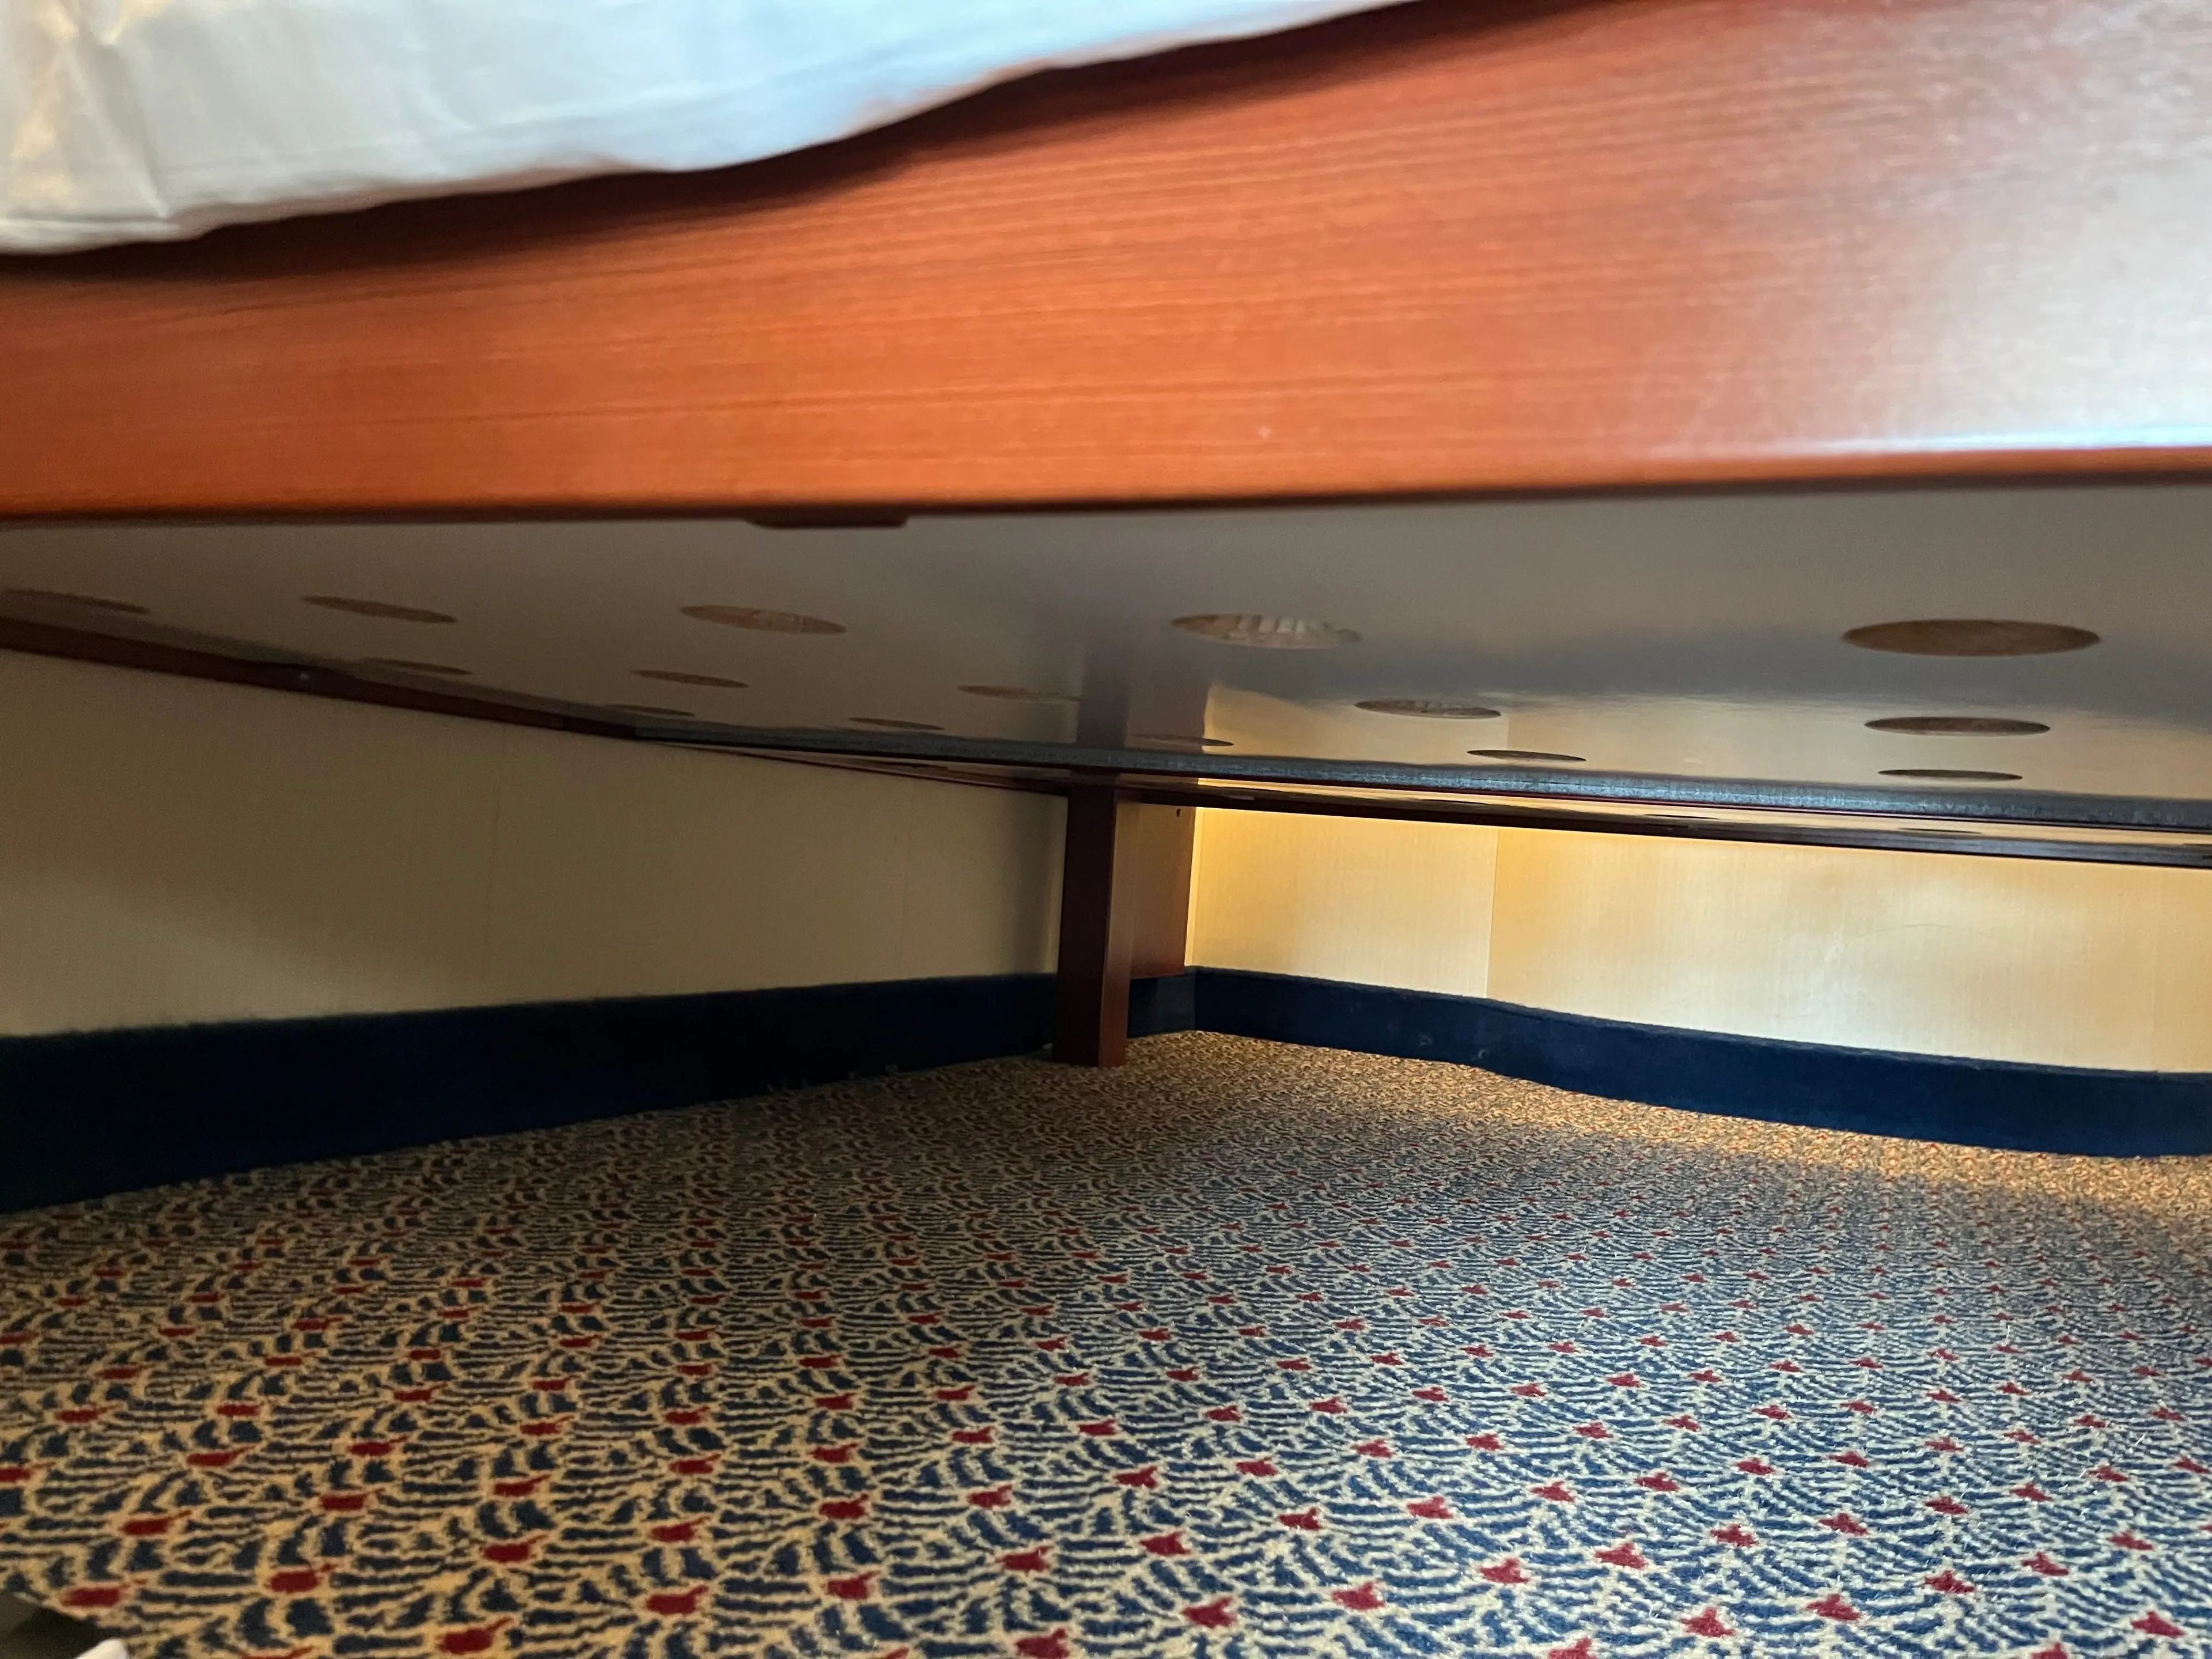 view under the queen-sized bed in a family stateroom on a disney cruise